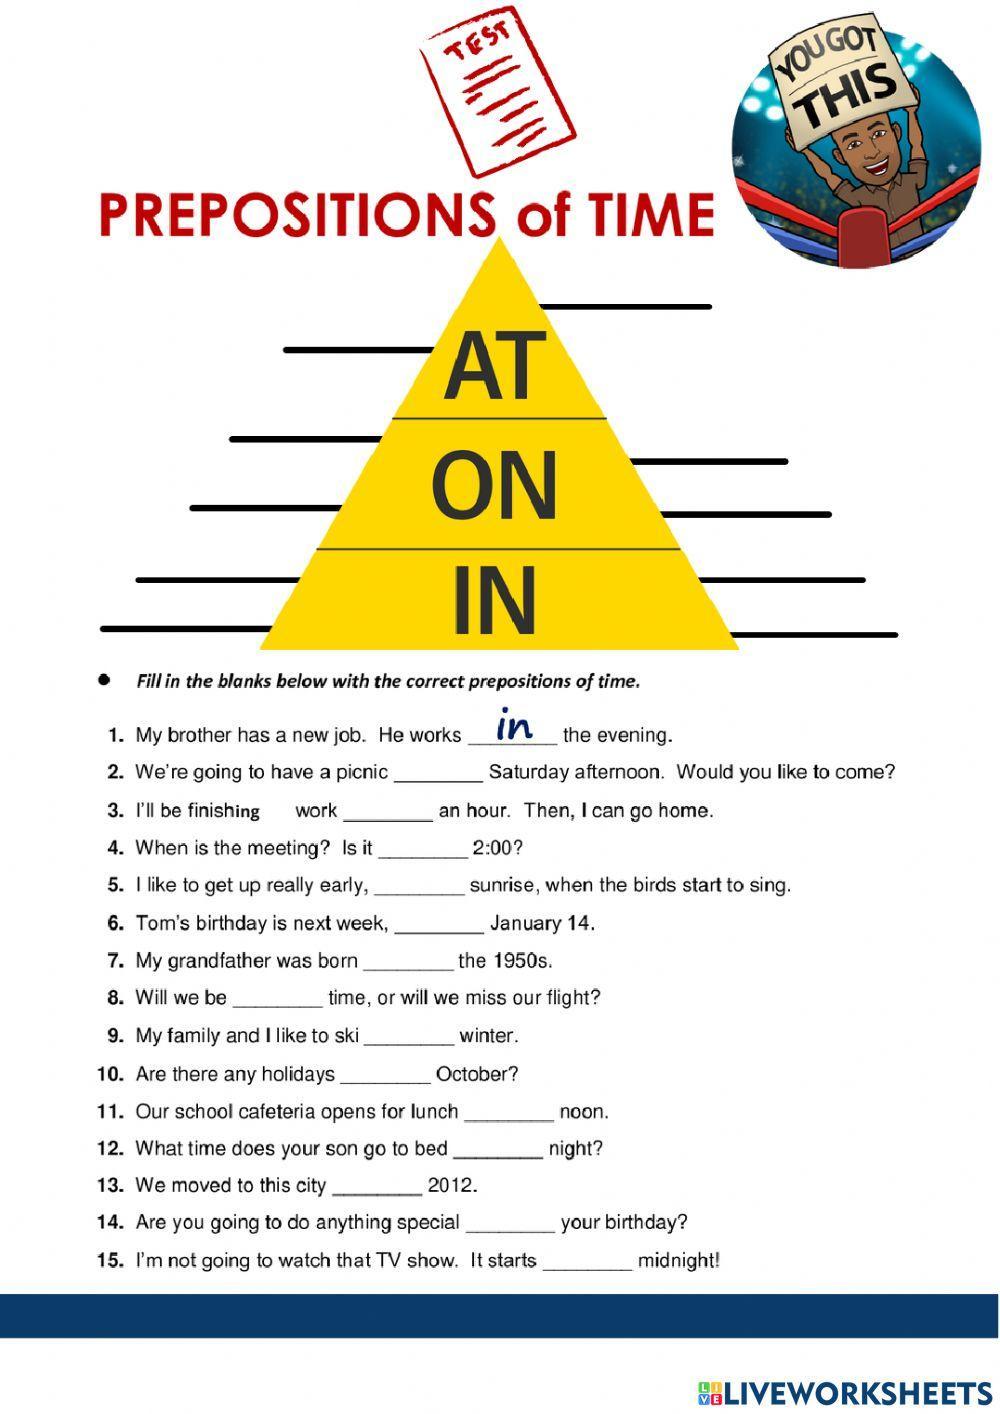 TEST PREPOSITIONS OF TIME at, on, in worksheet